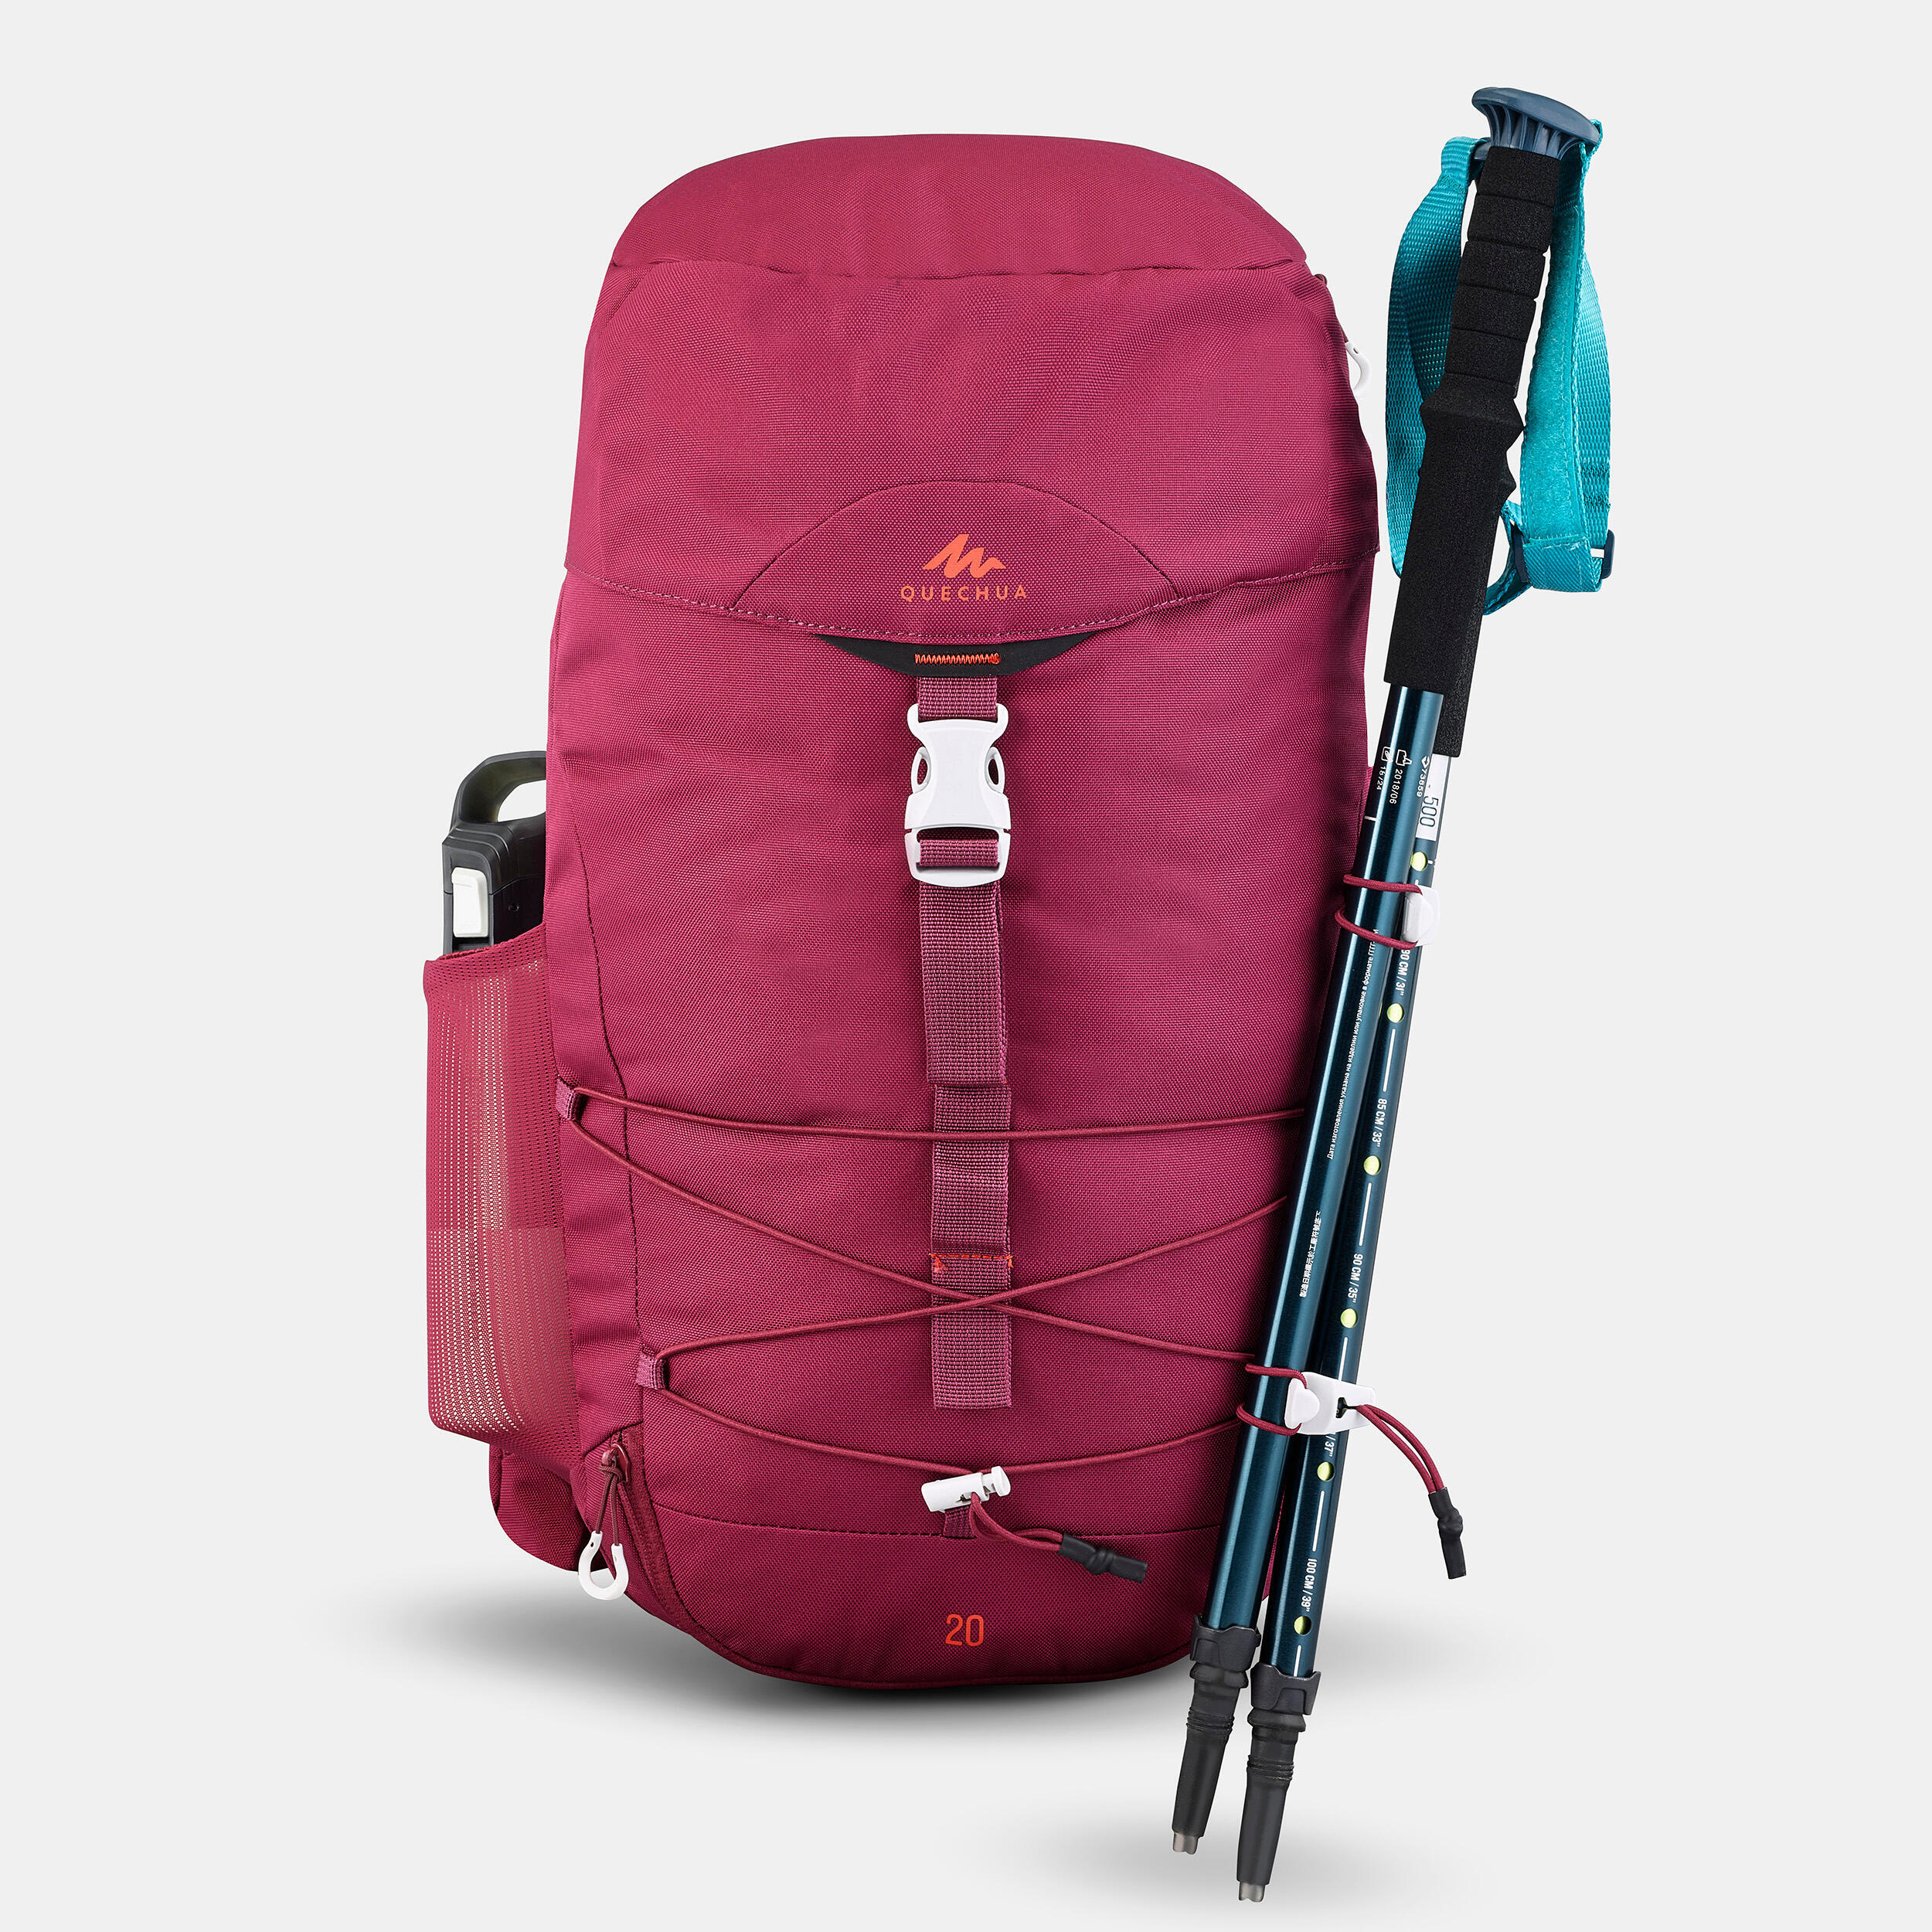 Mountain hiking backpack 20L - MH100 4/15